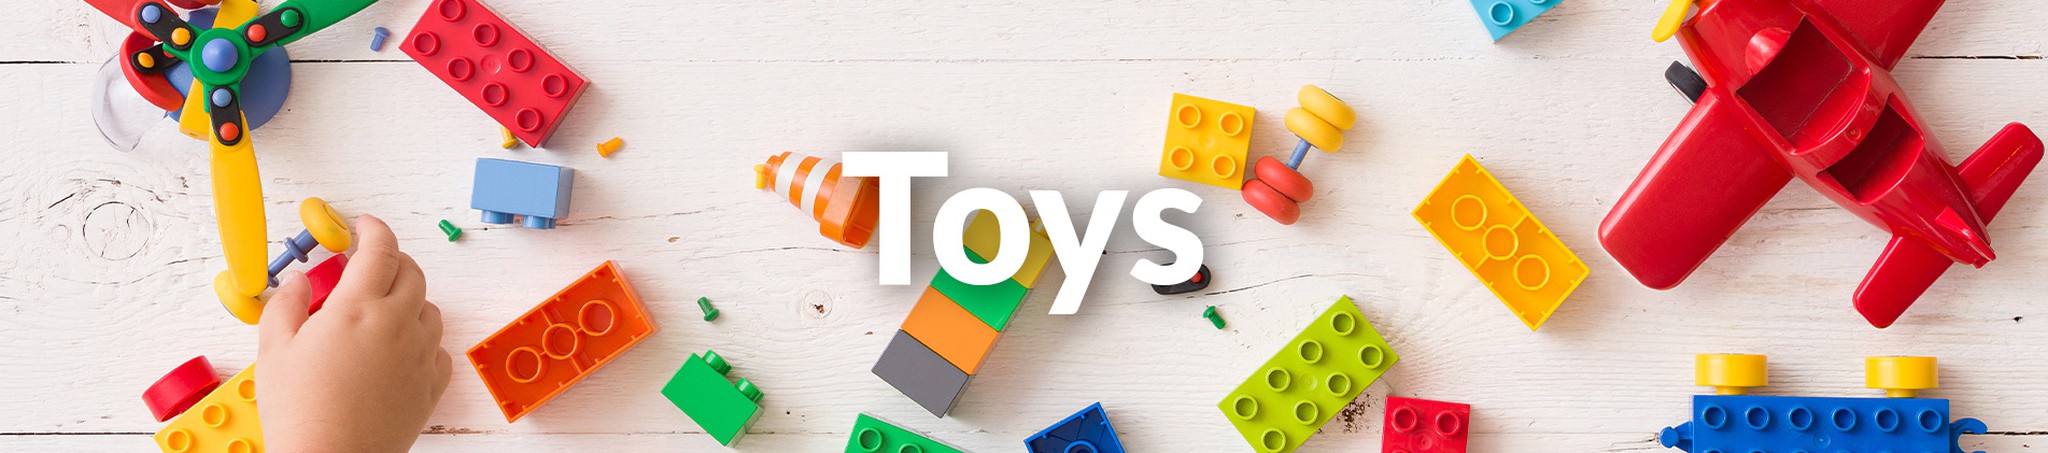 The best selection of games and toys for the little ones in the house